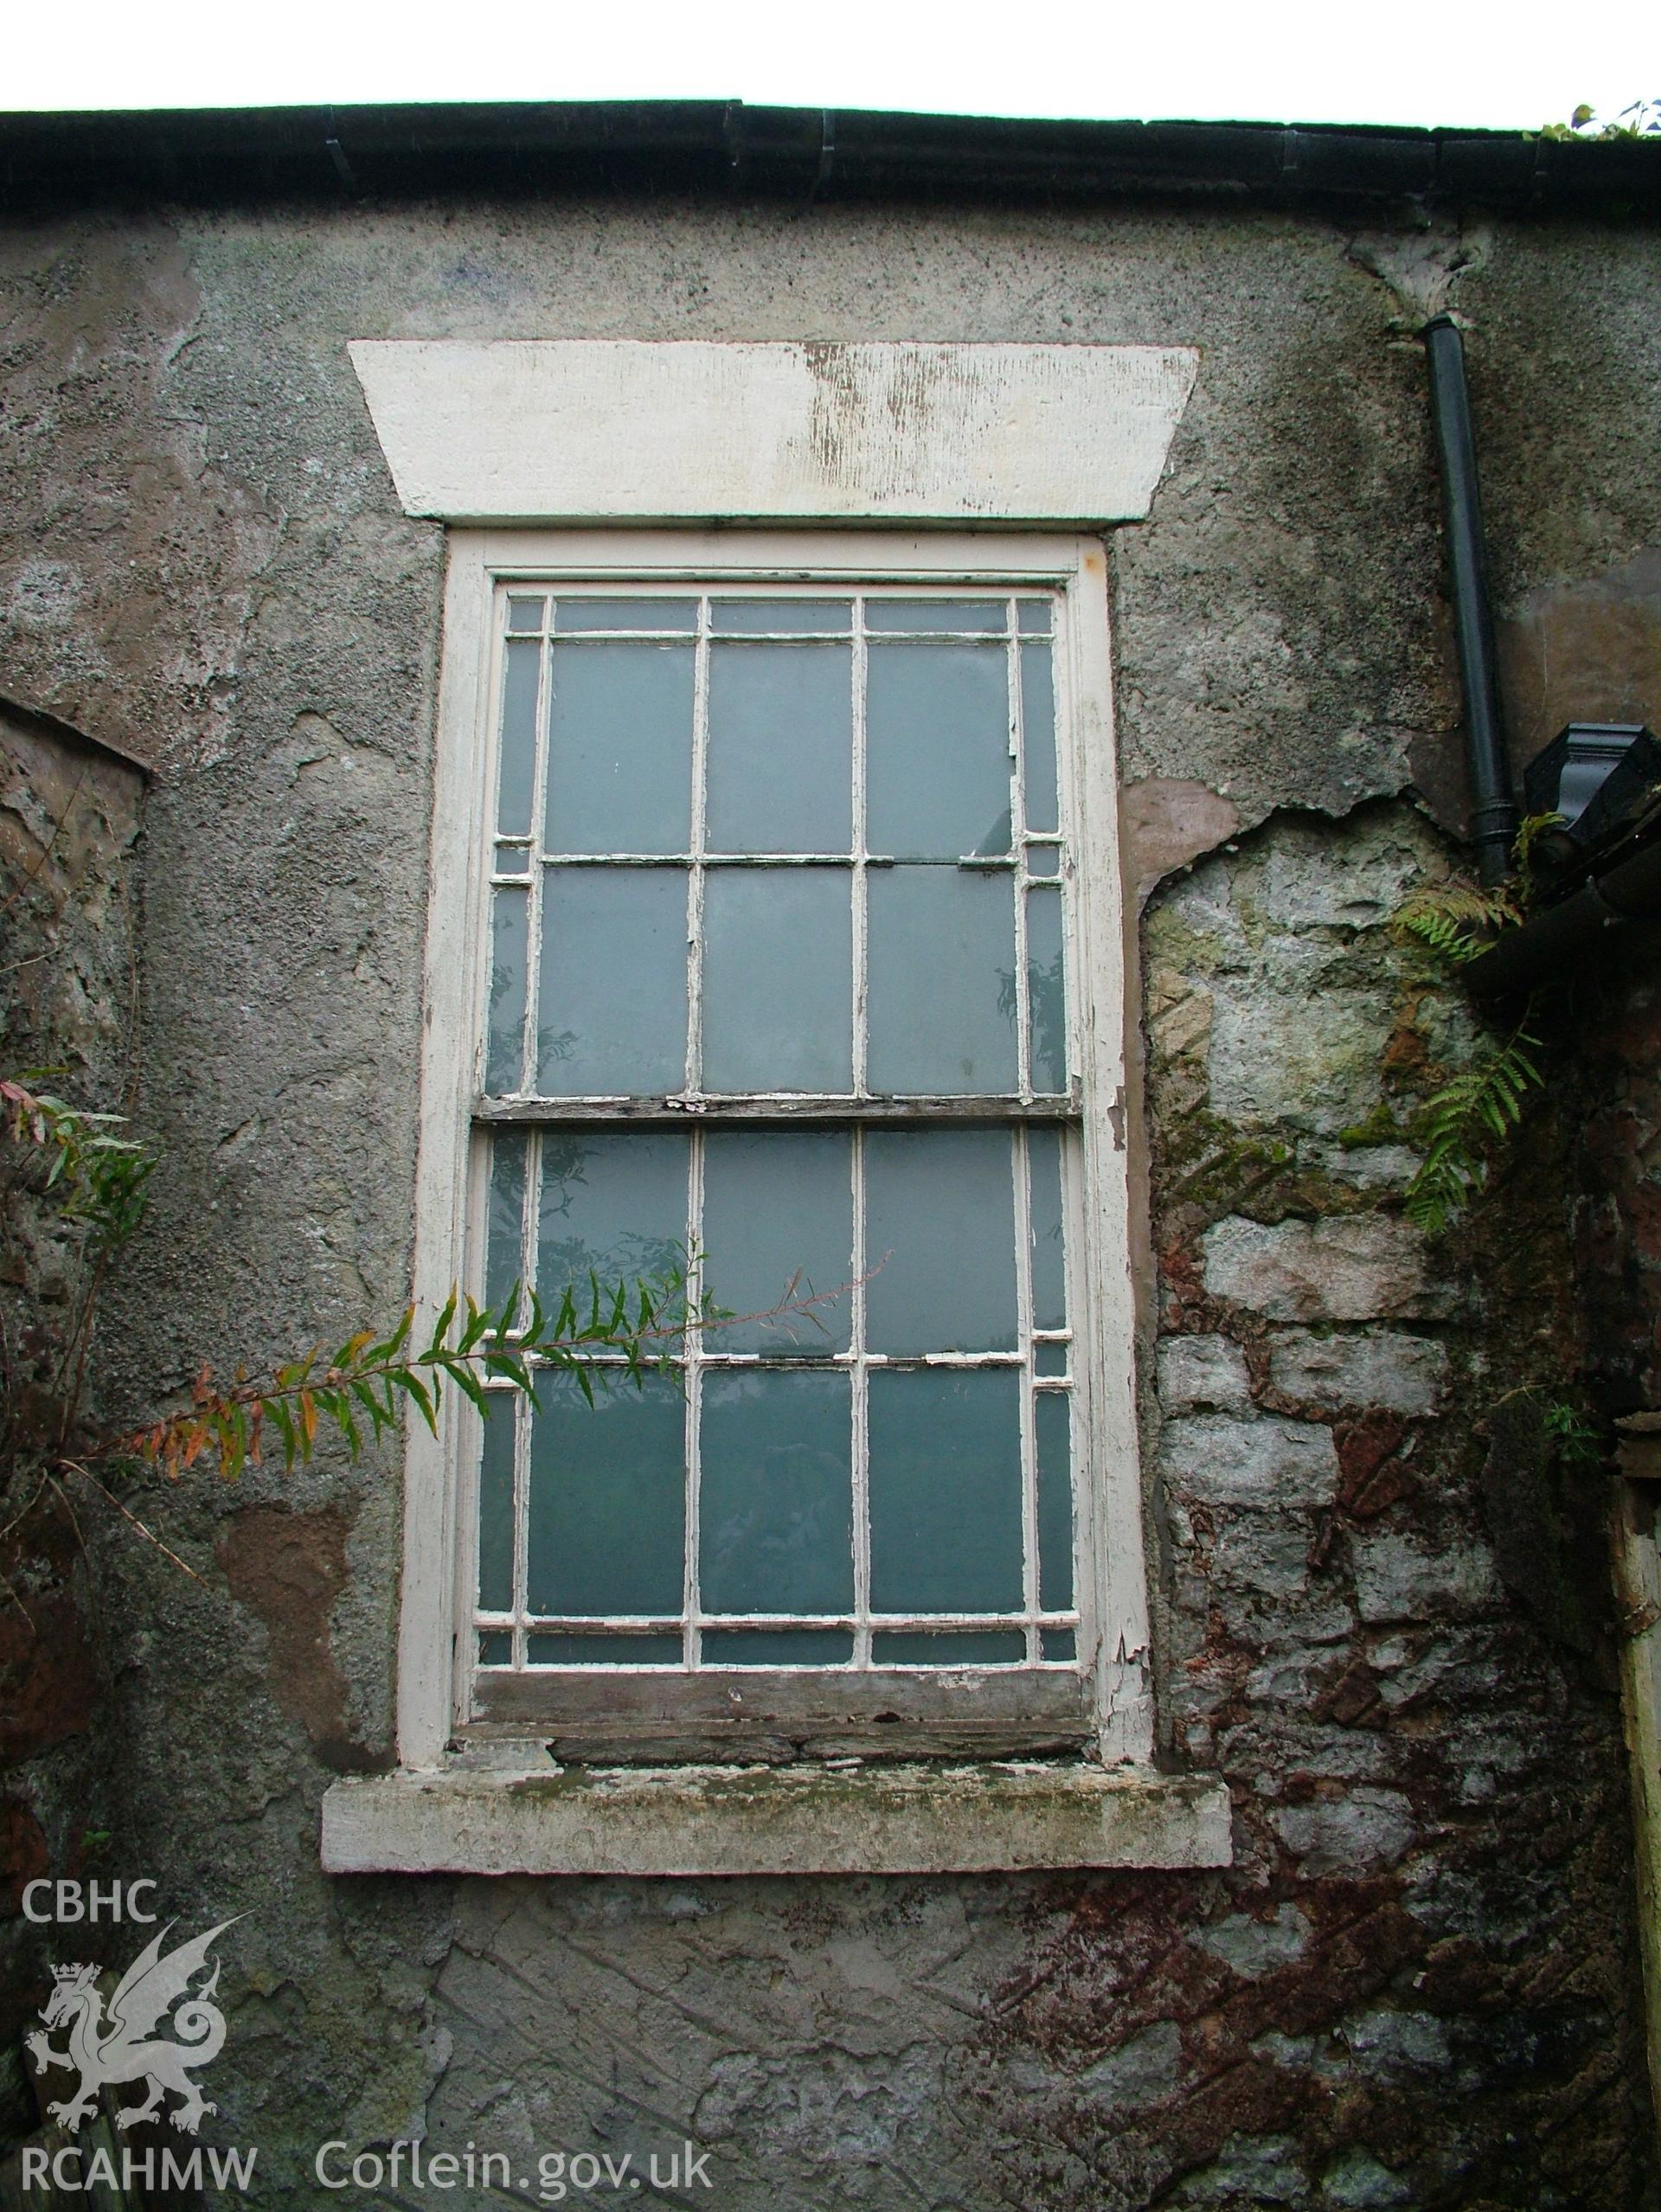 Digital colour photograph showing Llwynypandy chapel house - exterior view of window